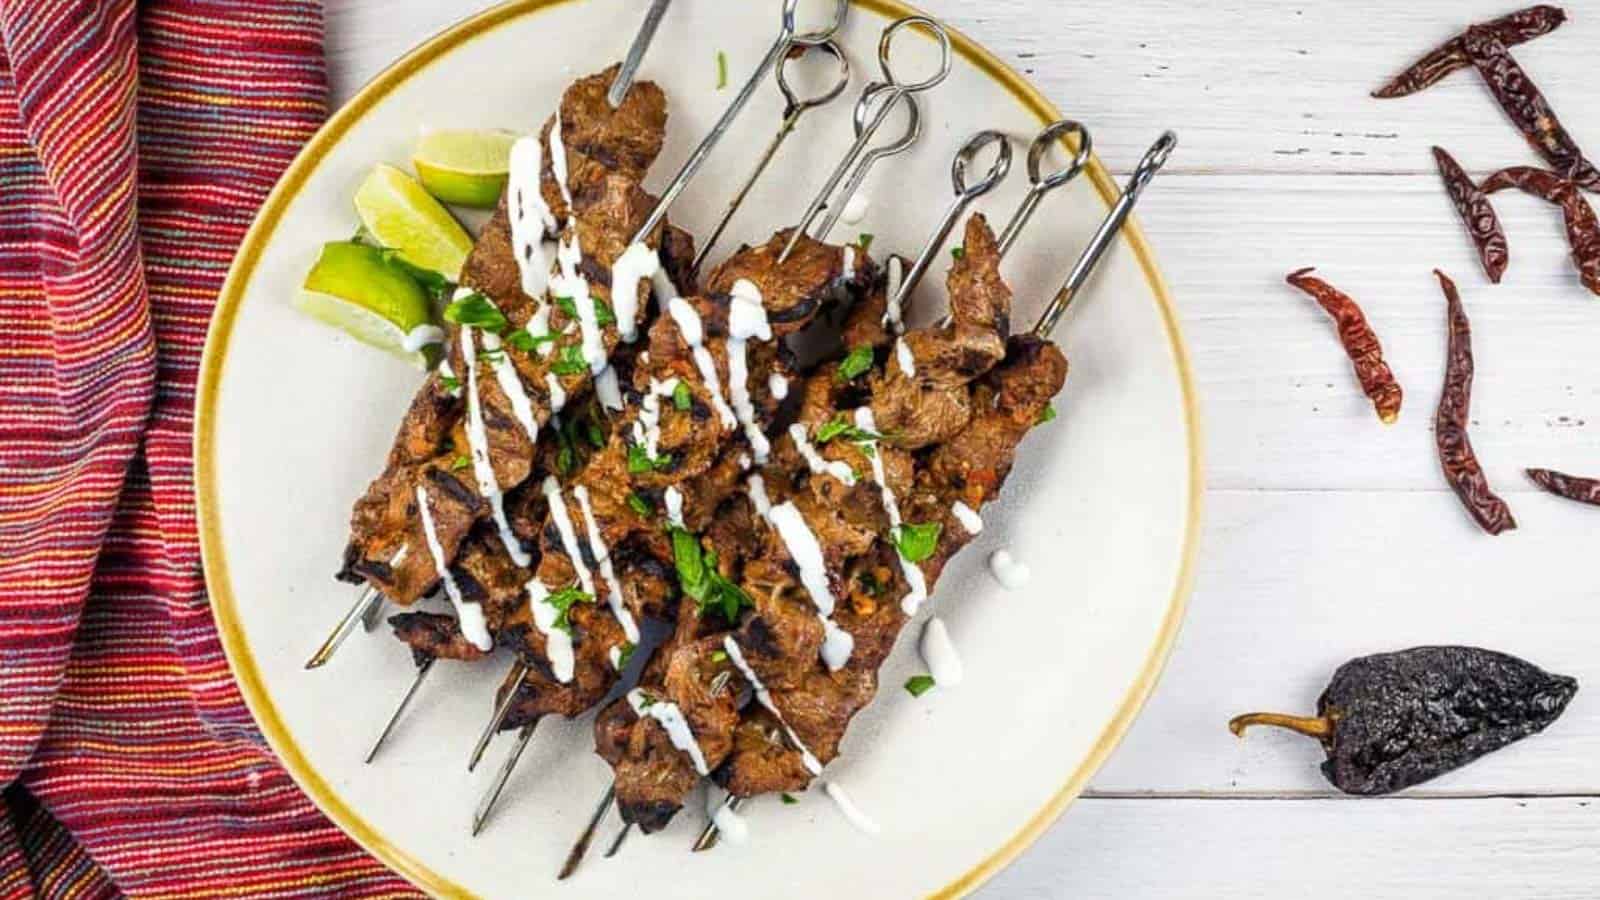 Grilled Steak skewers on a white plate with chilis nearby.